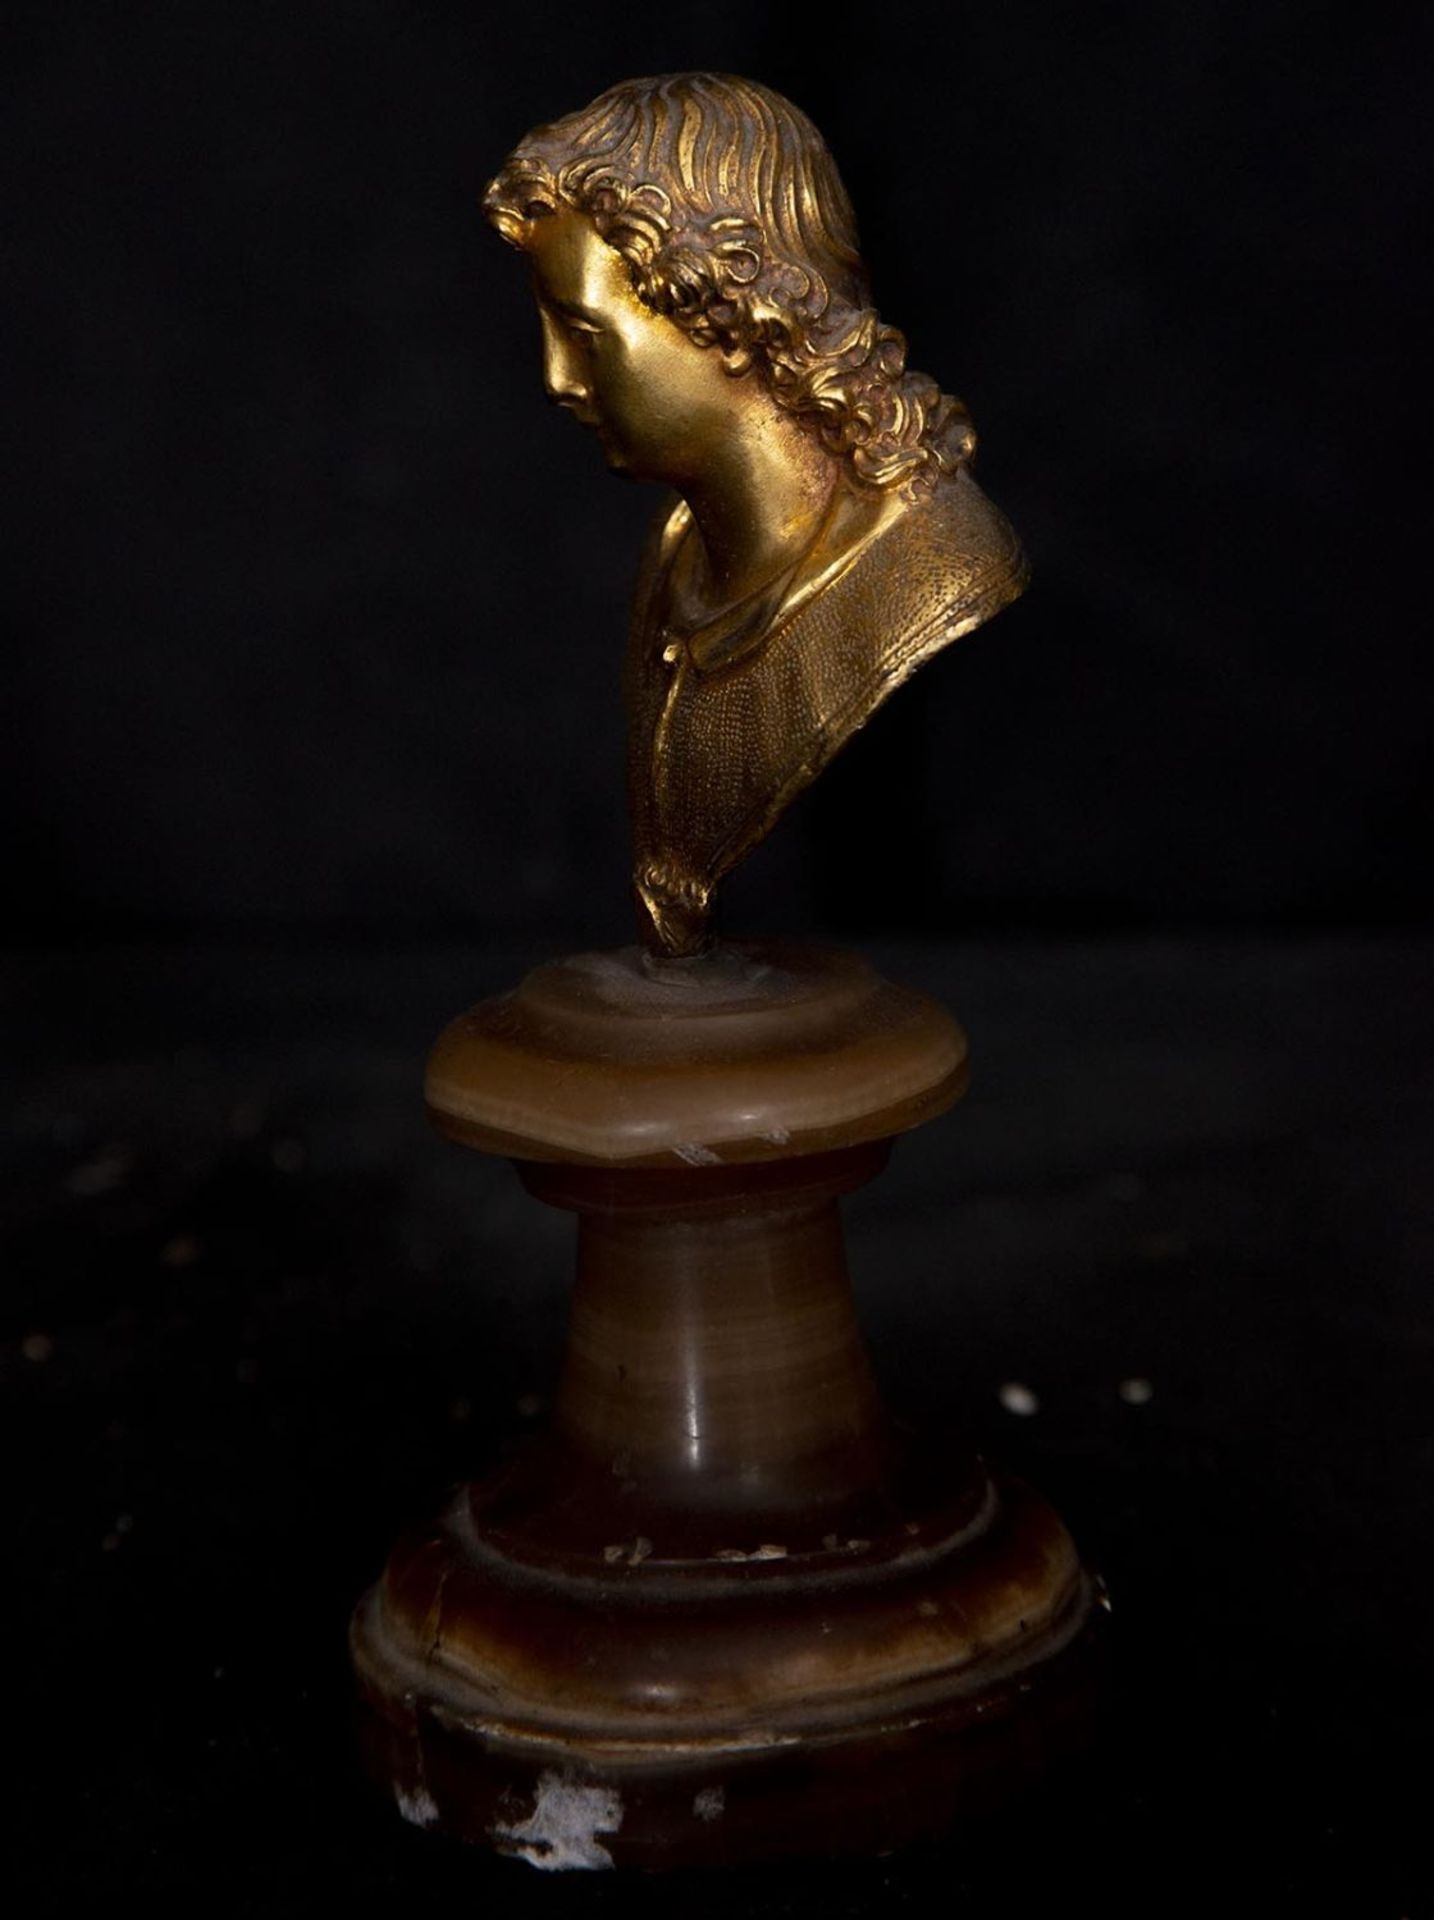 Exquisite bust in gilt bronze with onyx base, Italian school of Alessandro Algardi, Italy, 17th cent - Image 3 of 5